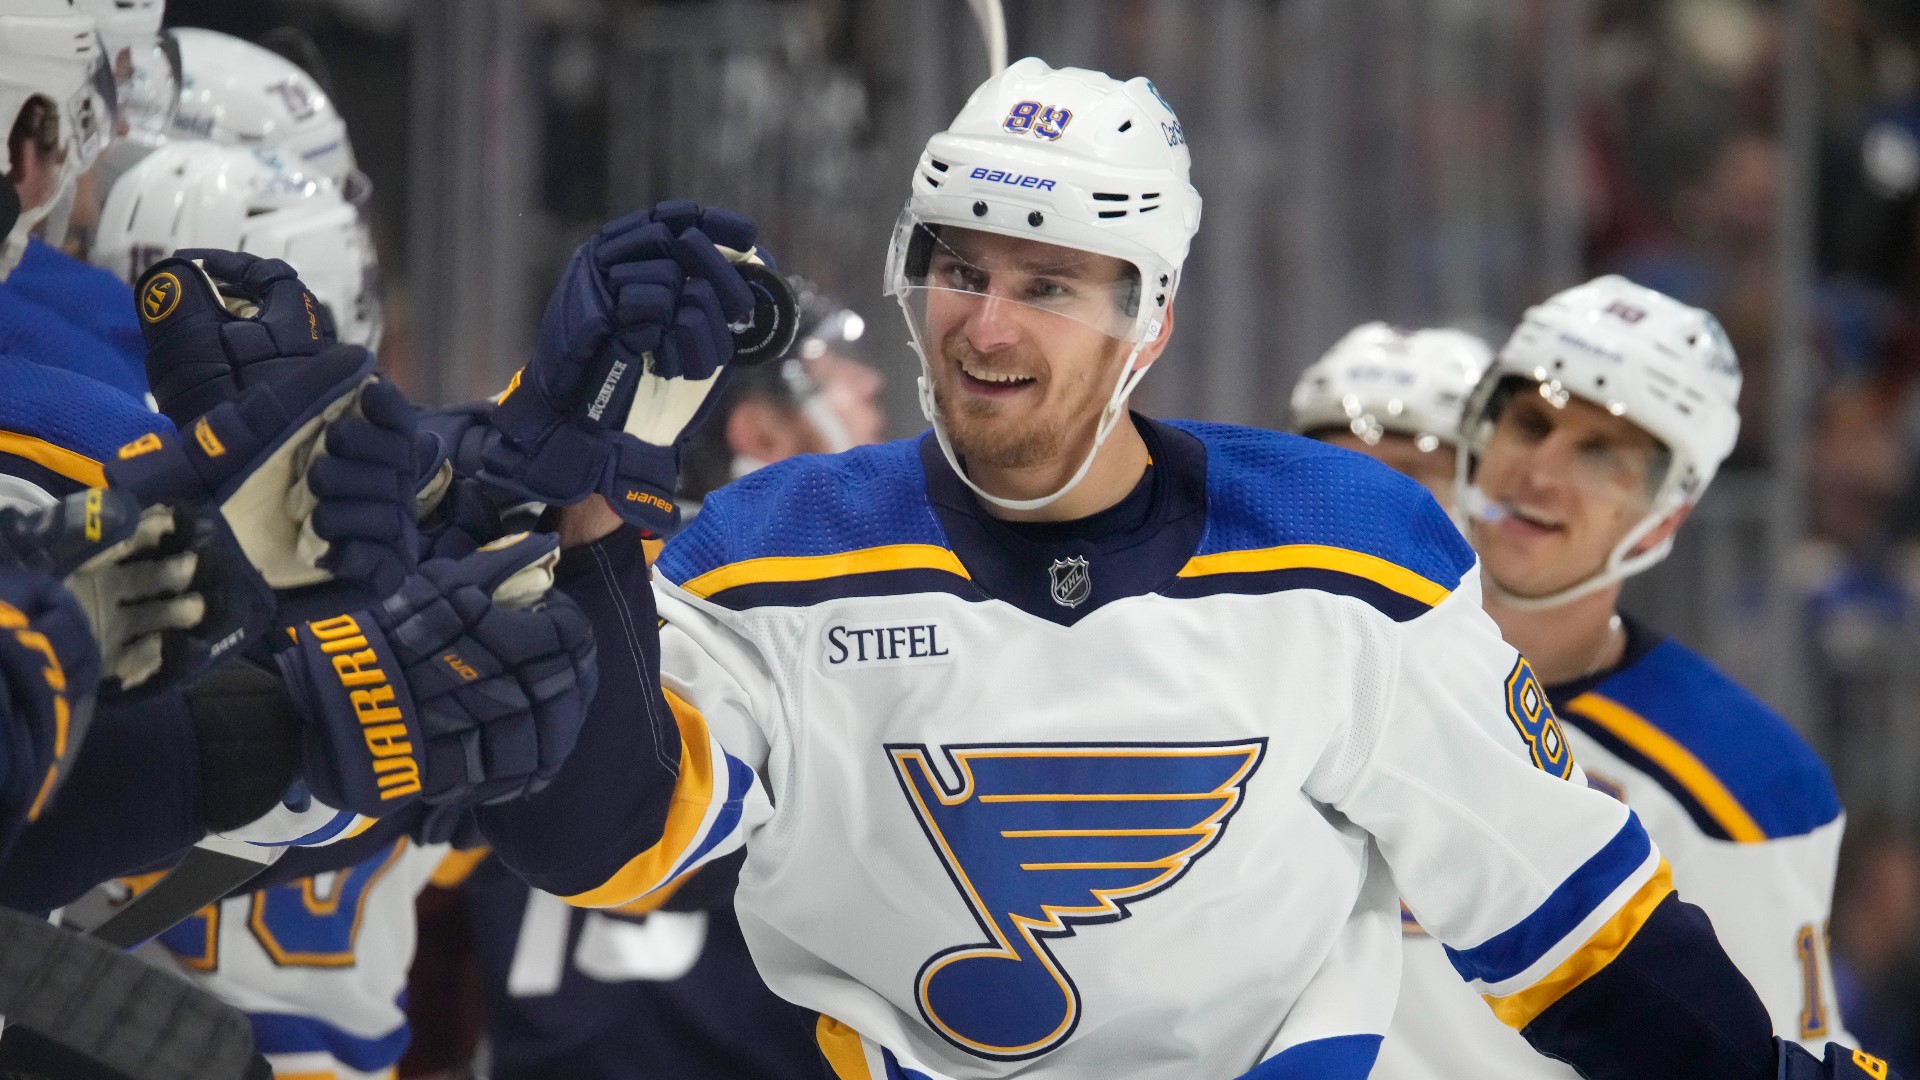 Alexey Toropchenko and Torey Krug also scored for the Blues, and Jordan Binnington stopped 36 shots as St. Louis evened a loss to Colorado earlier this month.